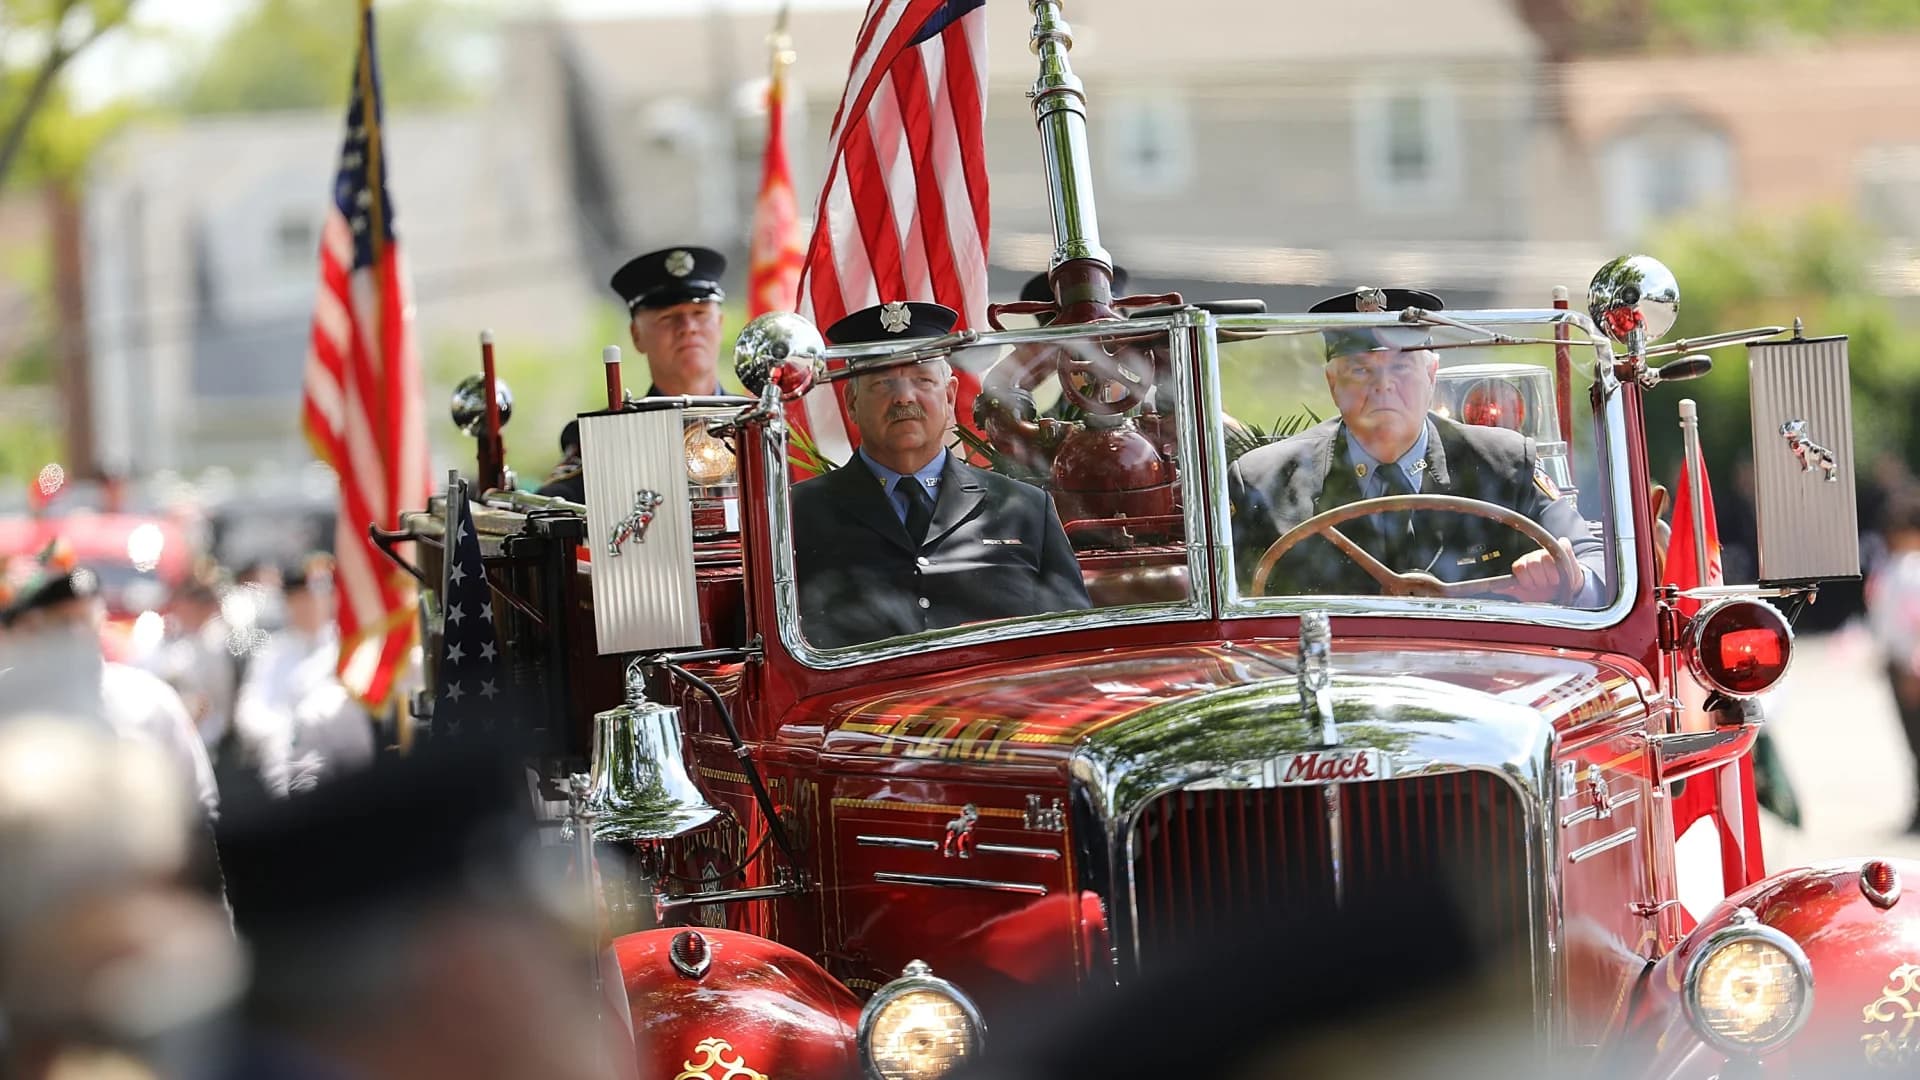 Photos: Funeral held for former FDNY firefighter Ray Pfeifer